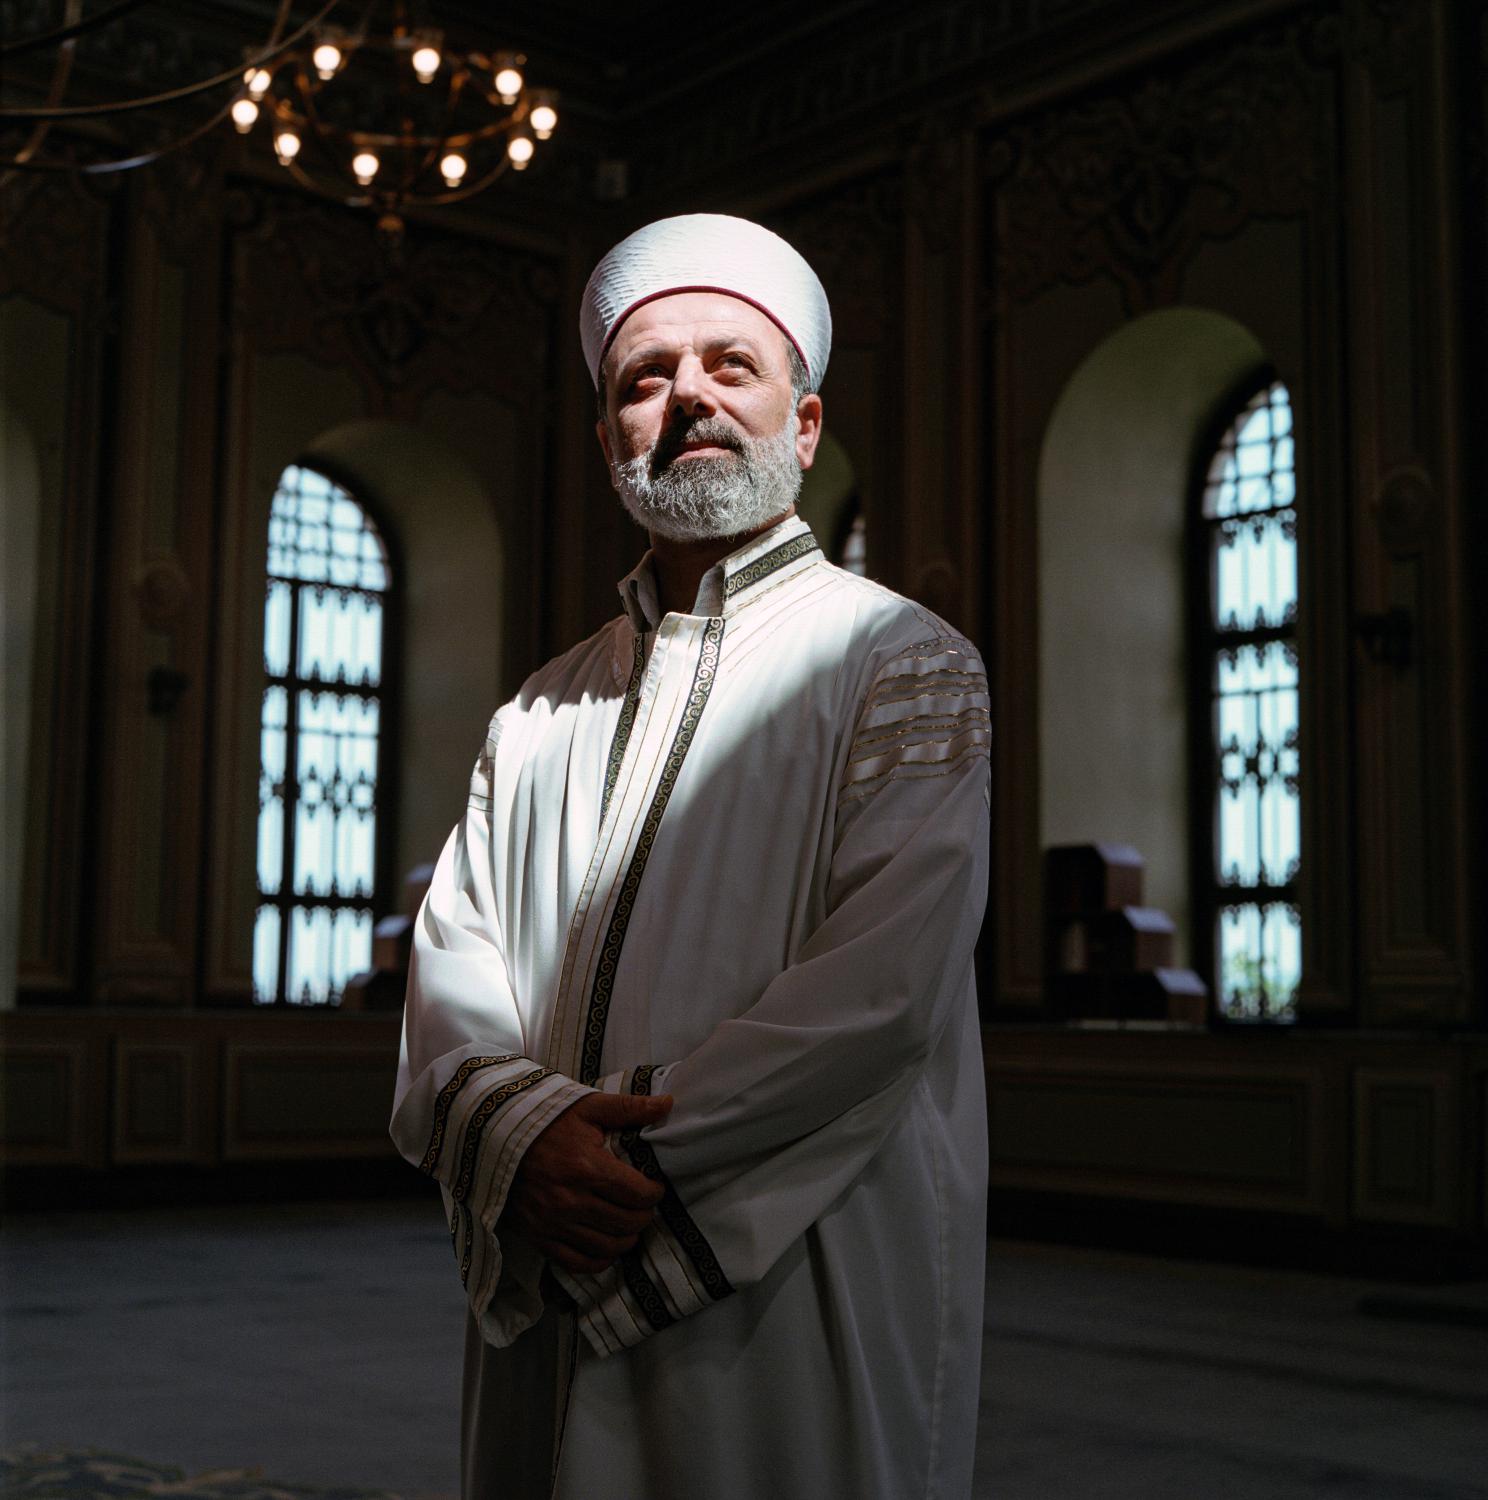 Istanbul: A Lockdown Diary - “Since the Ottoman era, we [imams] have been...